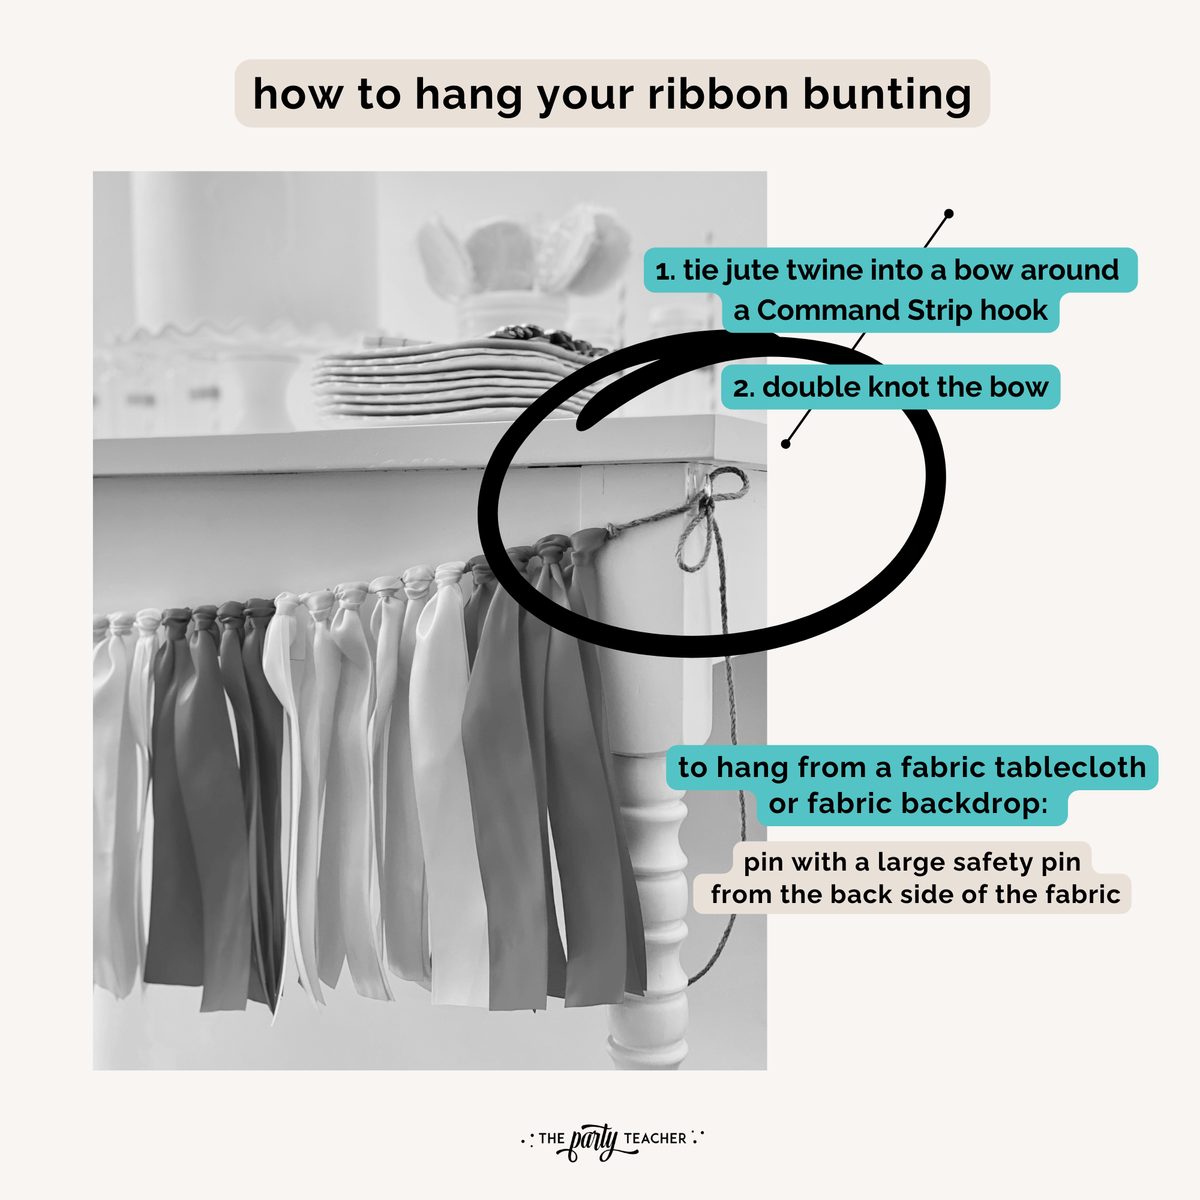 How to hang your ribbon party bunting